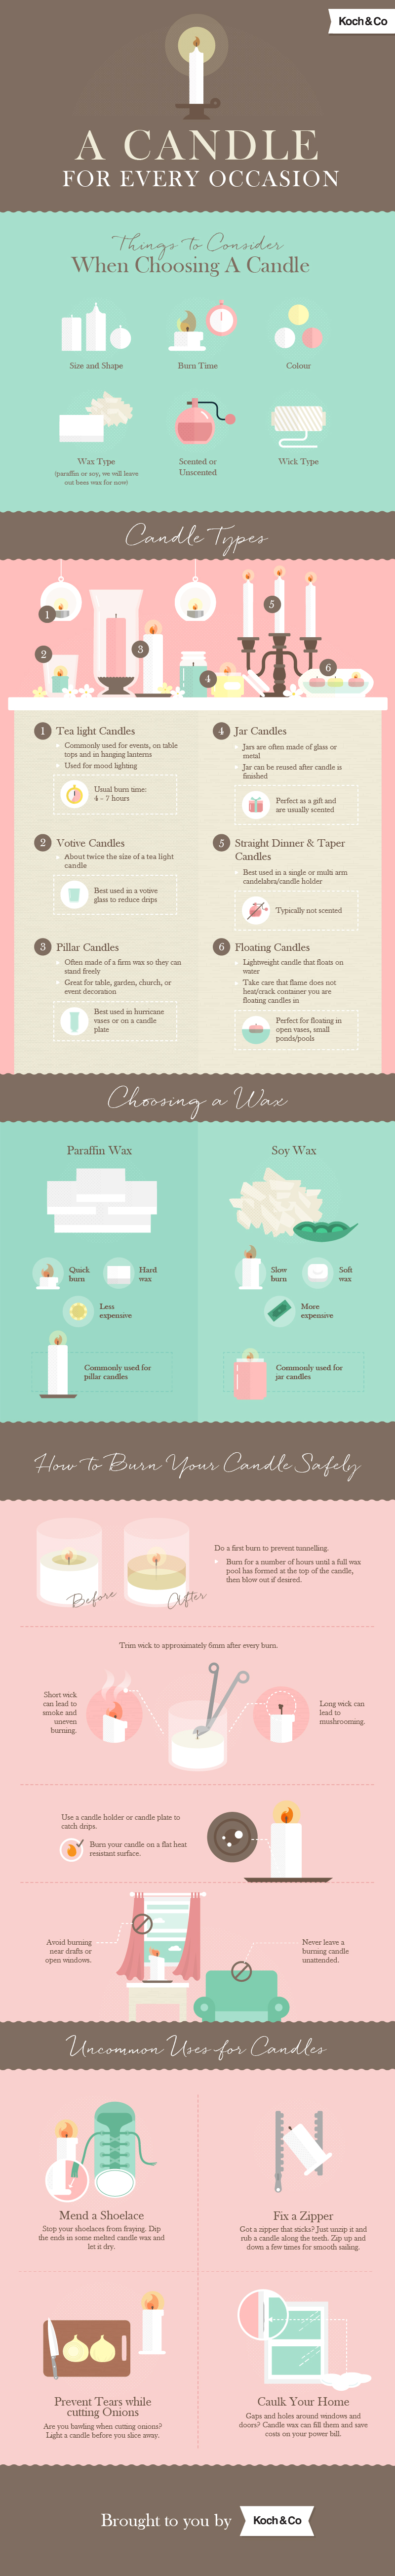 an infographic about the 6 types of candles